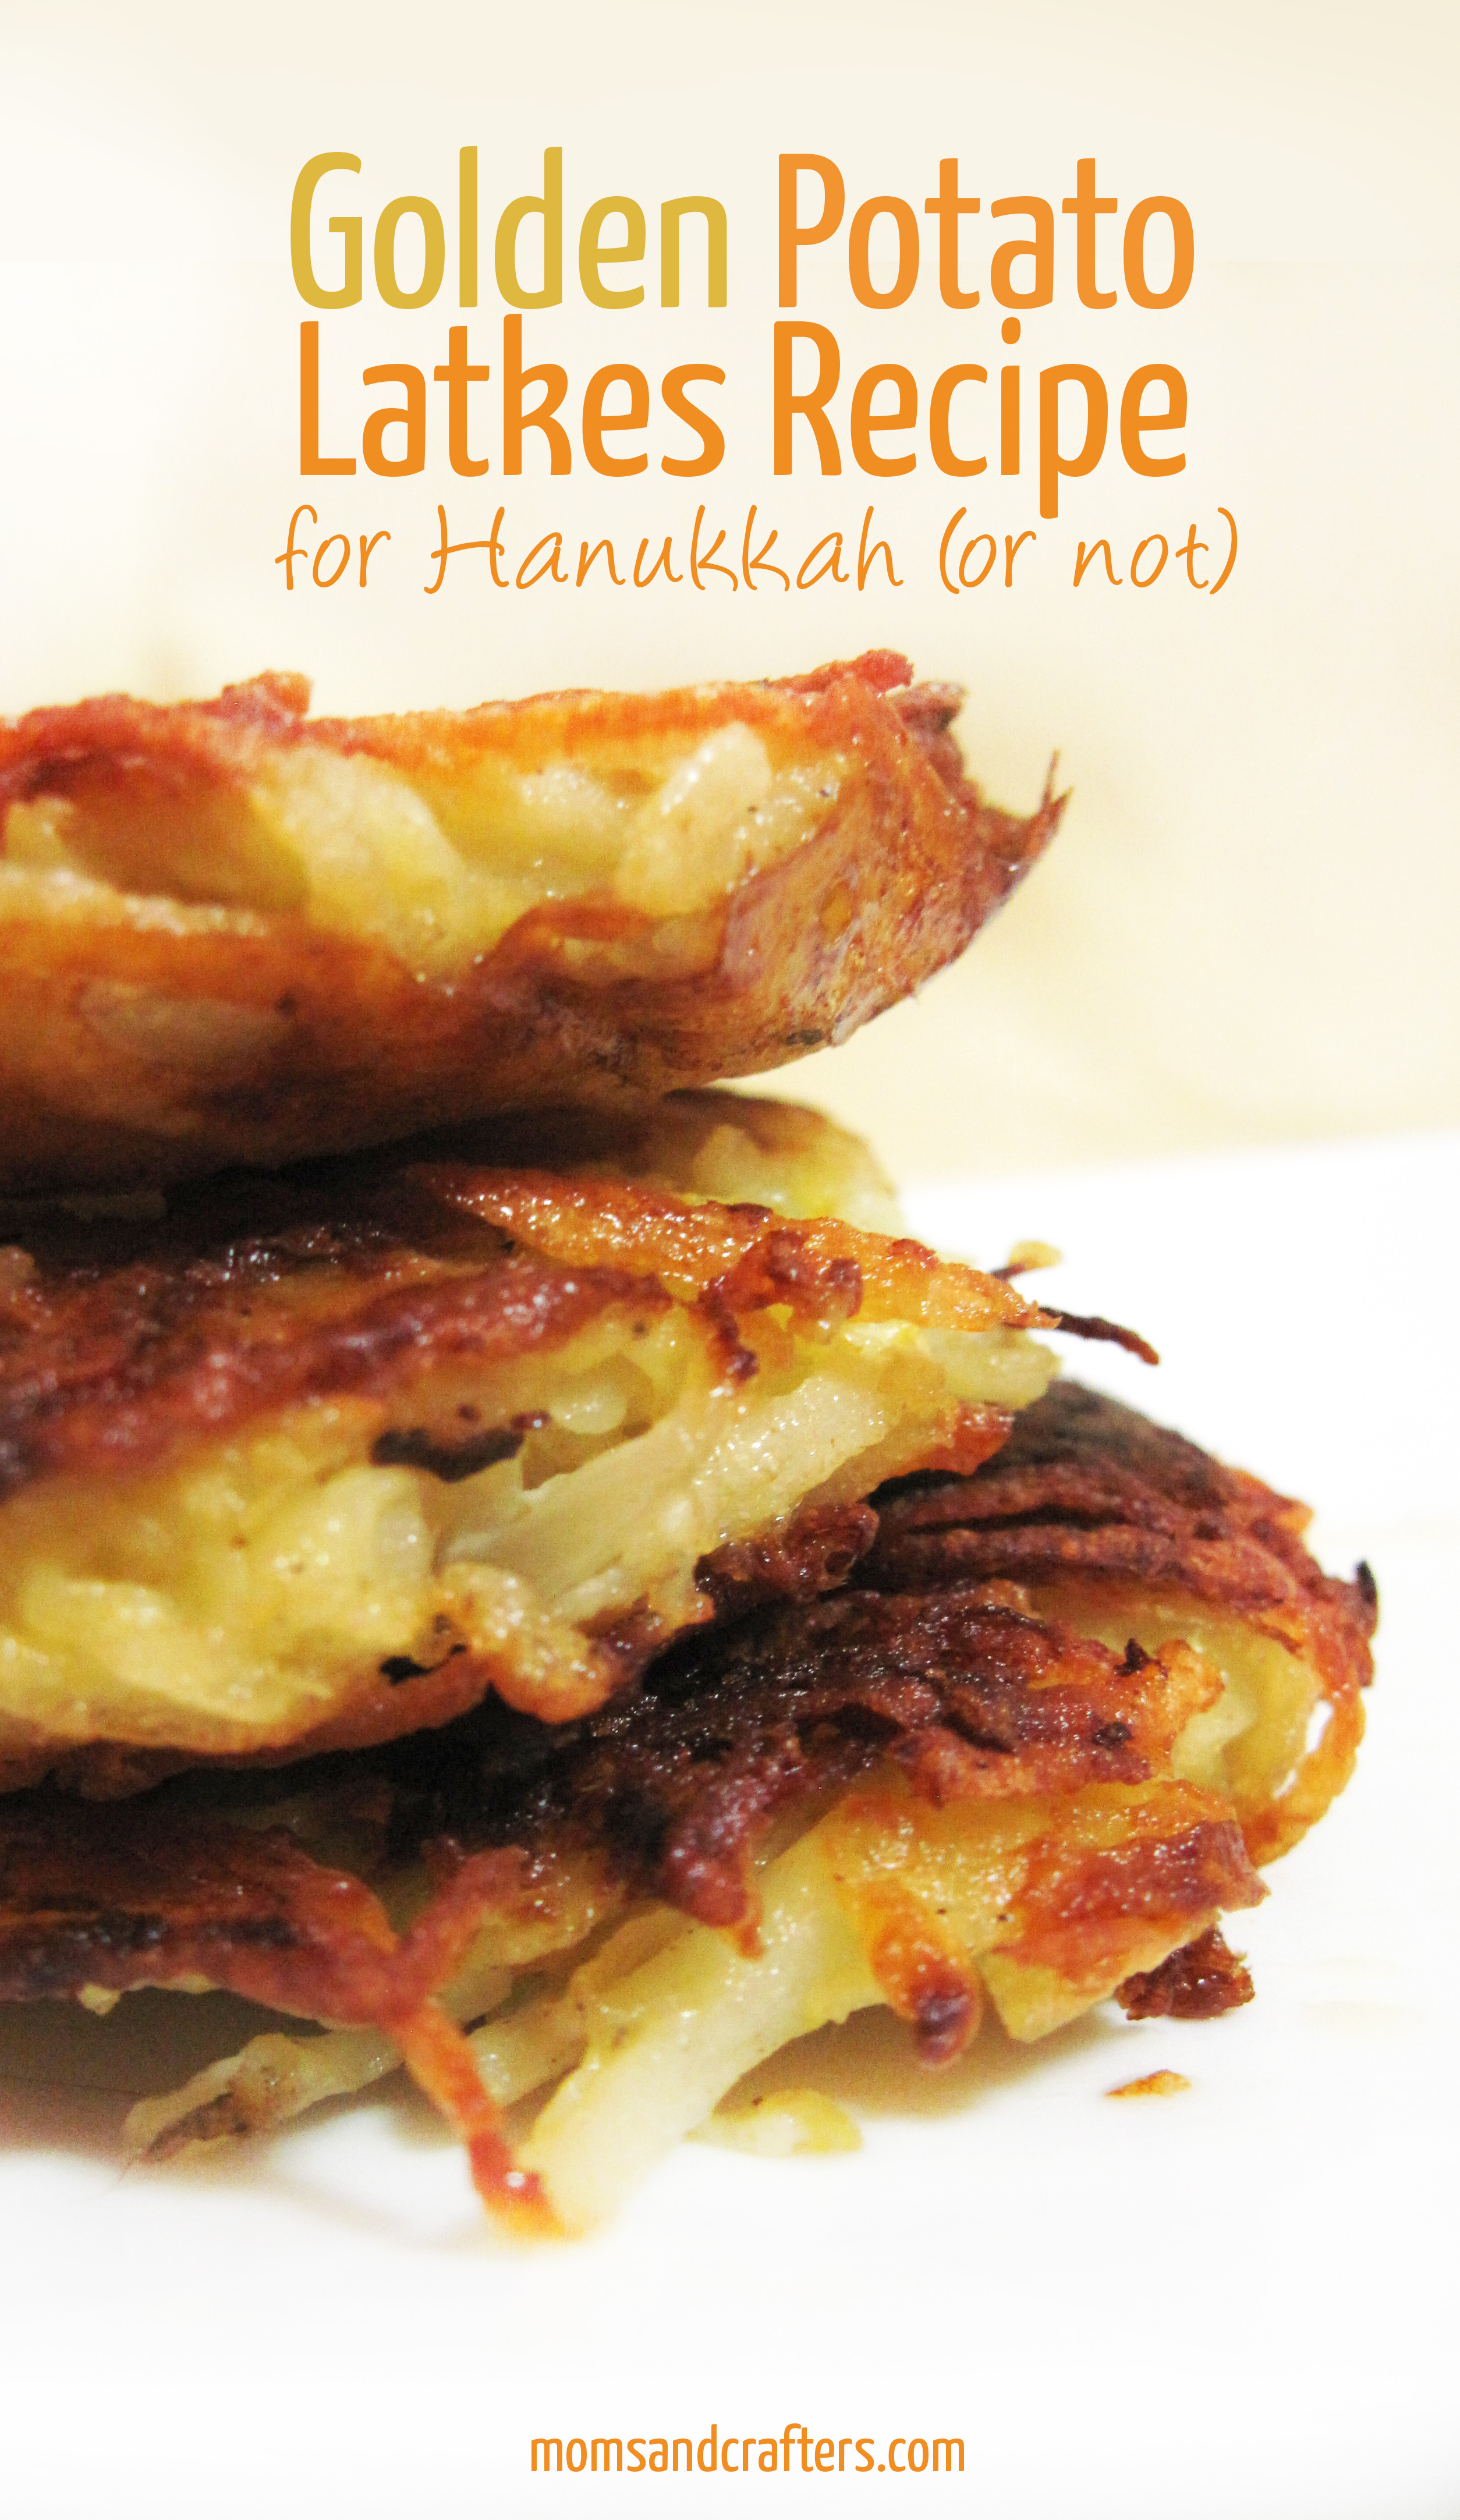 You don't need to celebrate Hanukkah - or Chanukah - to love this yummy golden potato latkes recipe! Makes enough for a crowd - or turn the rest of the batch into kugel.